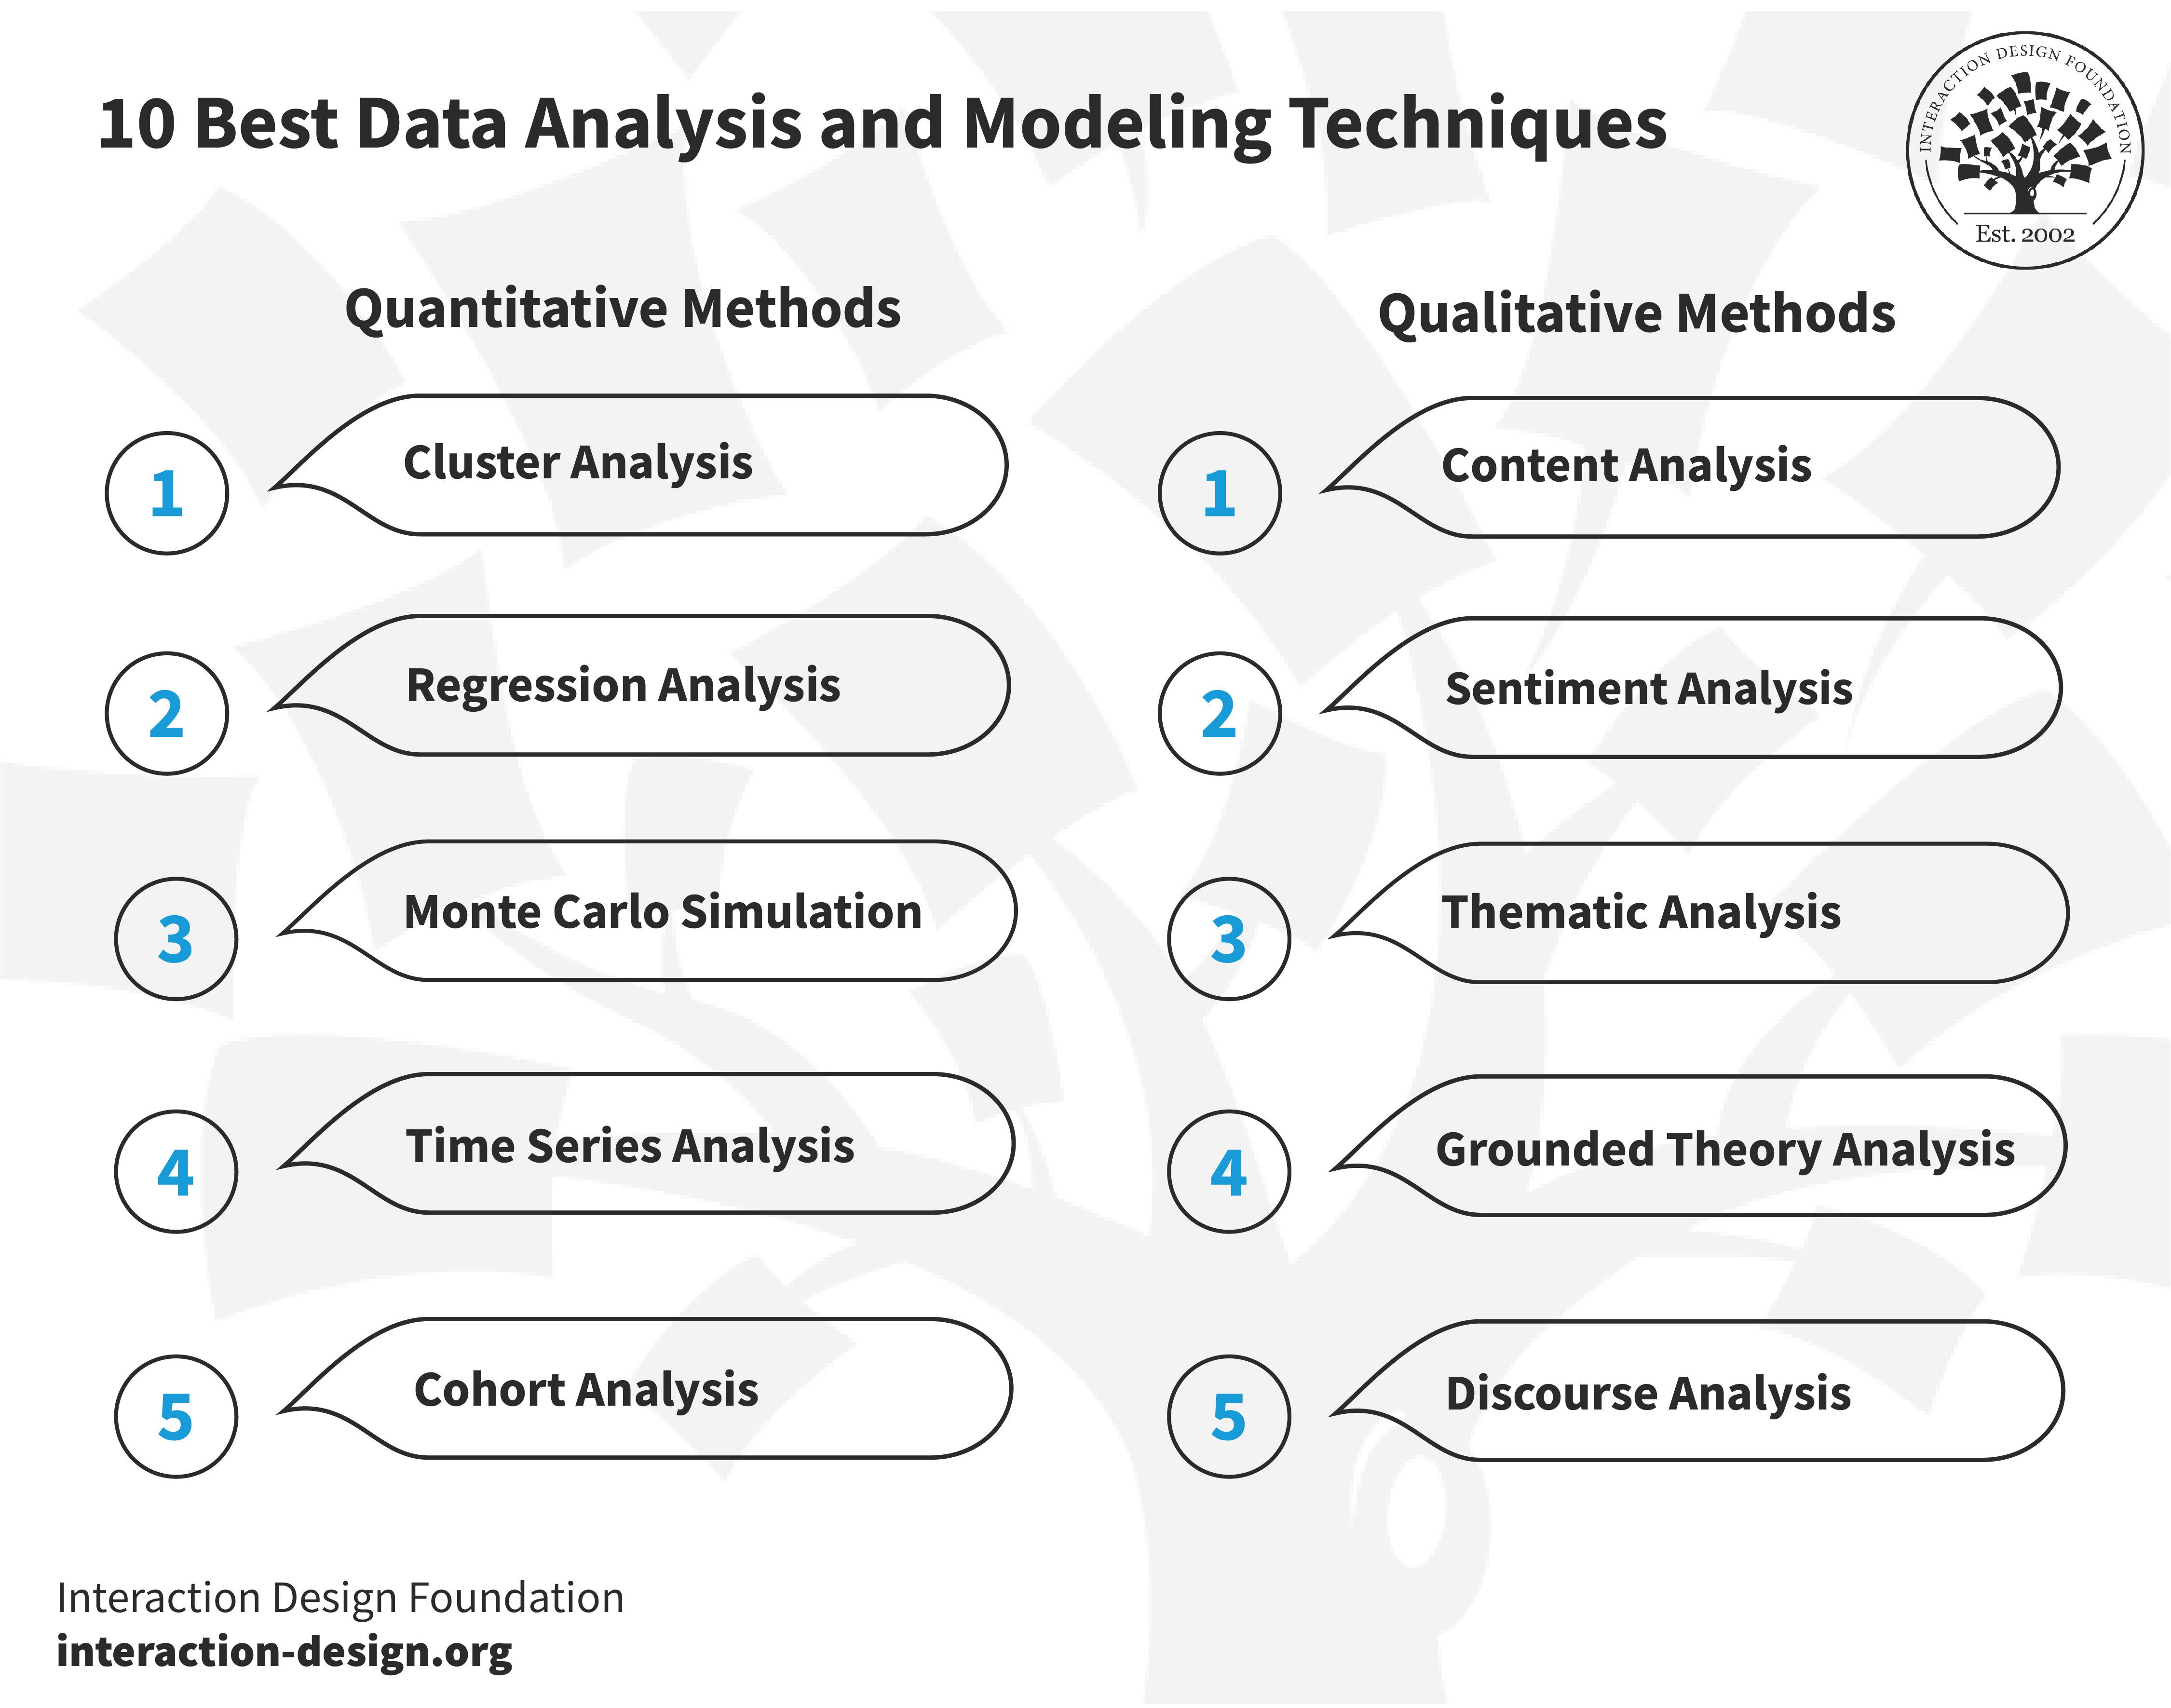 An infographic showcasing the best quantitative and qualitative data analysis techniques.